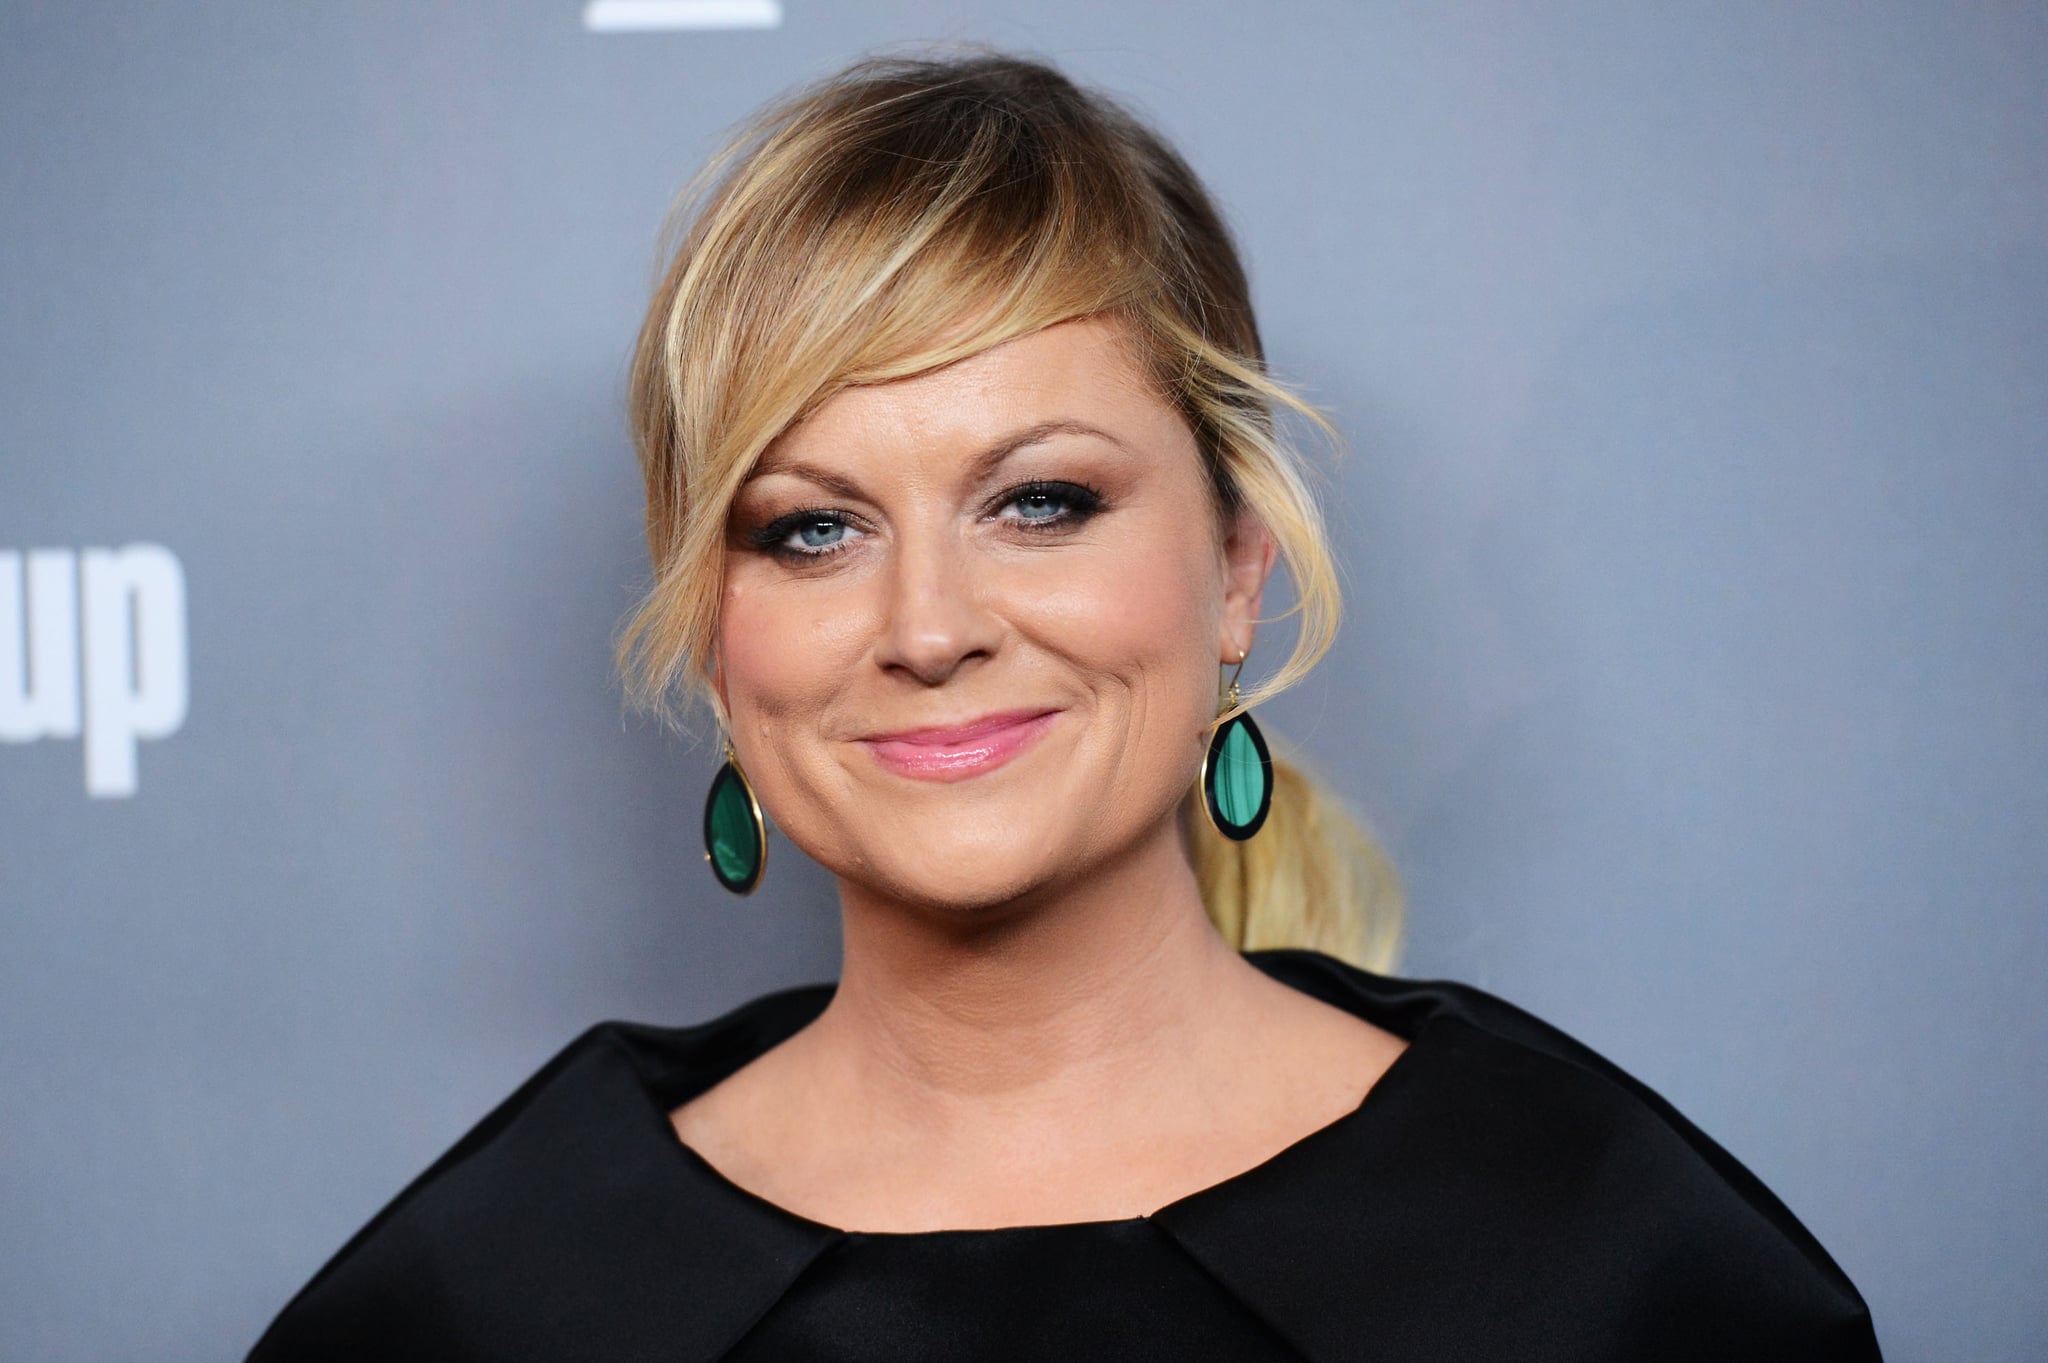 BEVERLY HILLS, CA - FEBRUARY 19:  Actress Amy Poehler attends the 15th Annual Costume Designers Guild Awards with presenting sponsor Lacoste at The Beverly Hilton Hotel on February 19, 2013 in Beverly Hills, California.  (Photo by Jason Merritt/Getty Images for CDG)